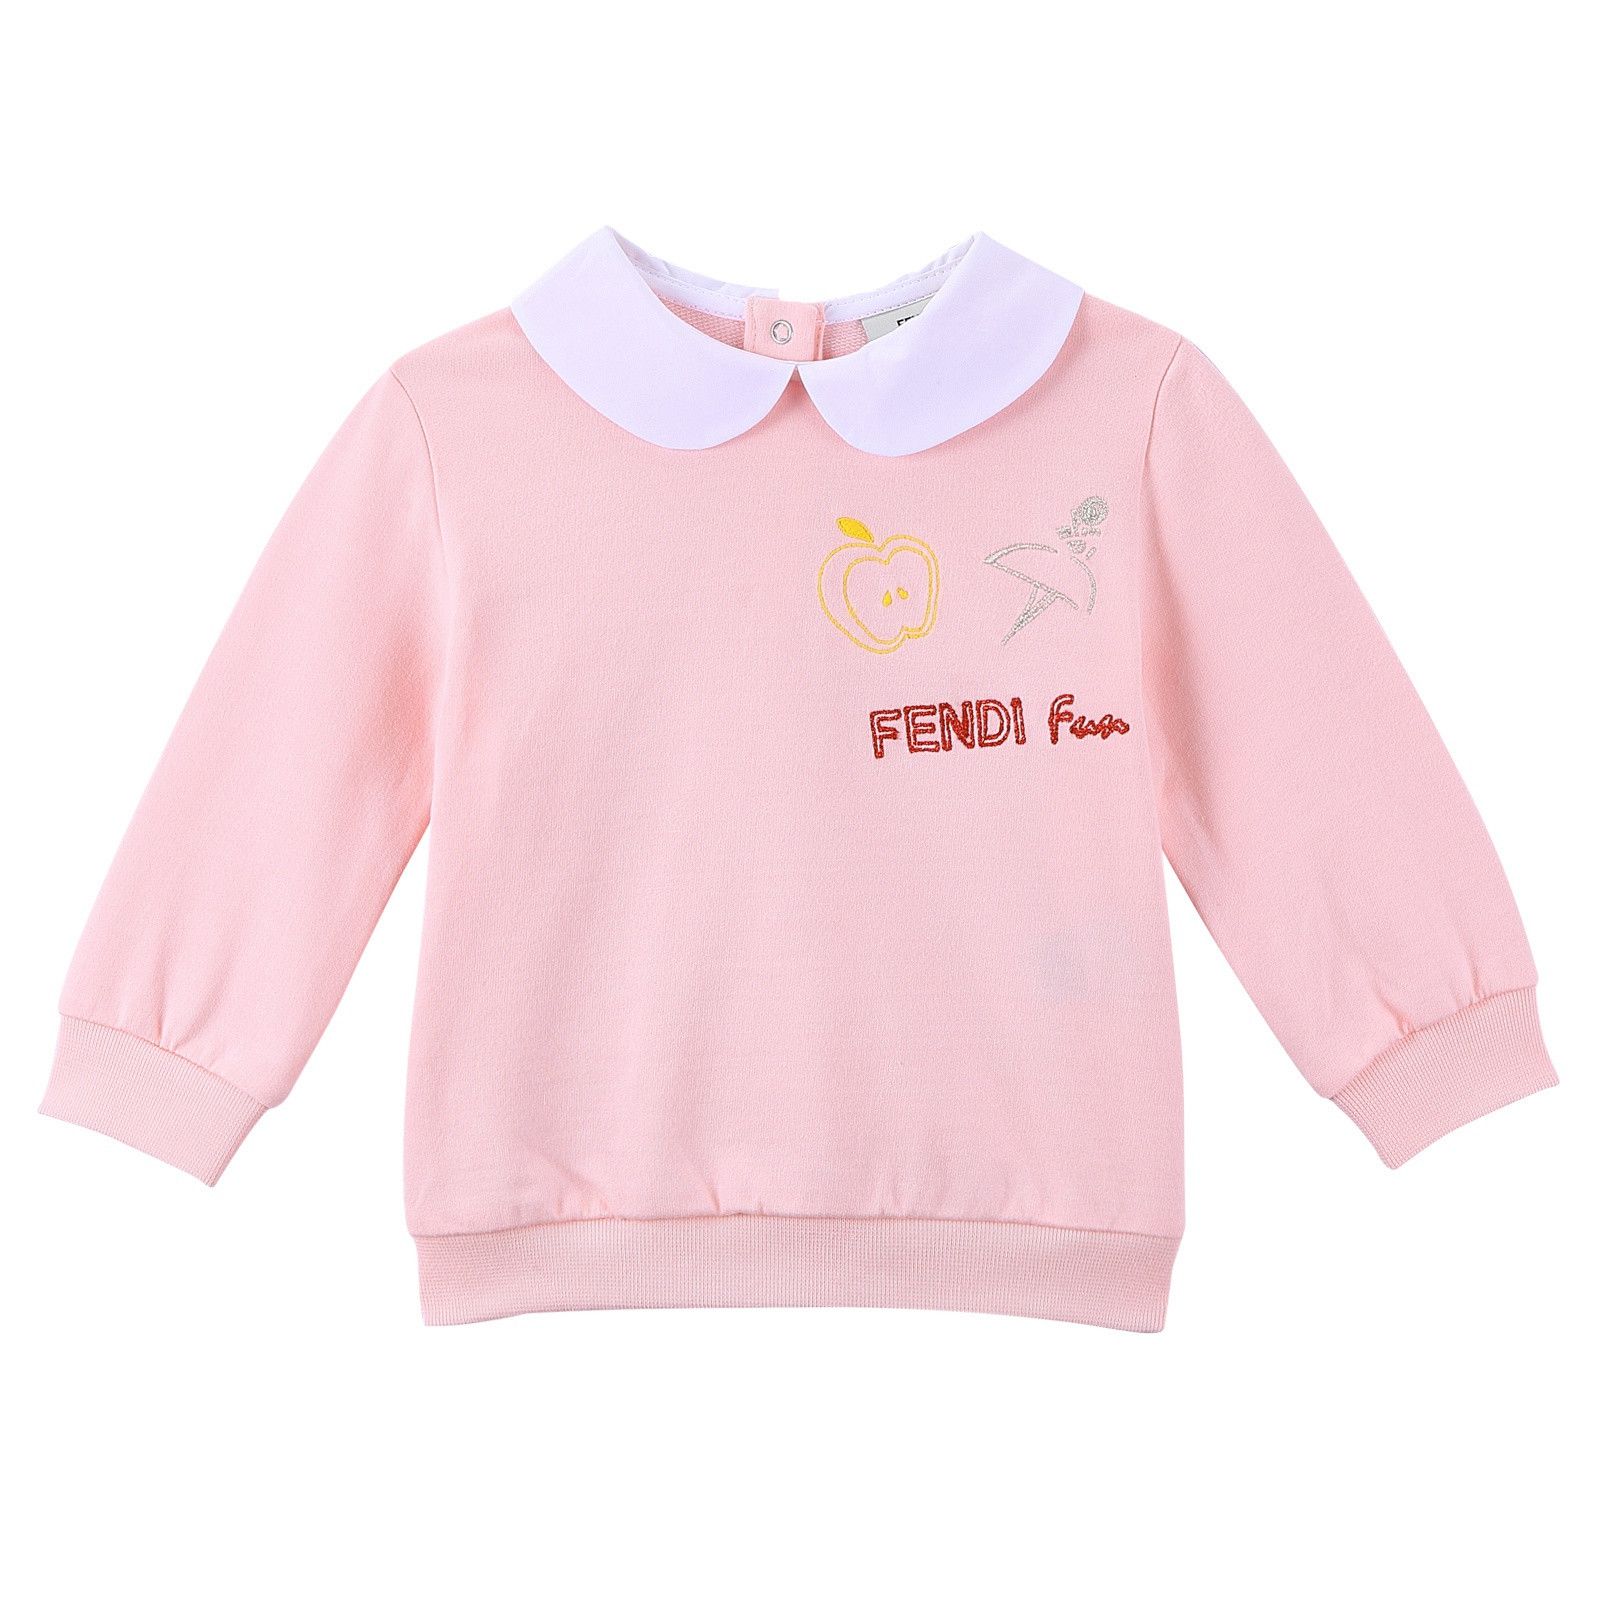 Baby Girls Pink Embroidered Trims Sweatshirt With Peter Pan Collar - CÉMAROSE | Children's Fashion Store - 1